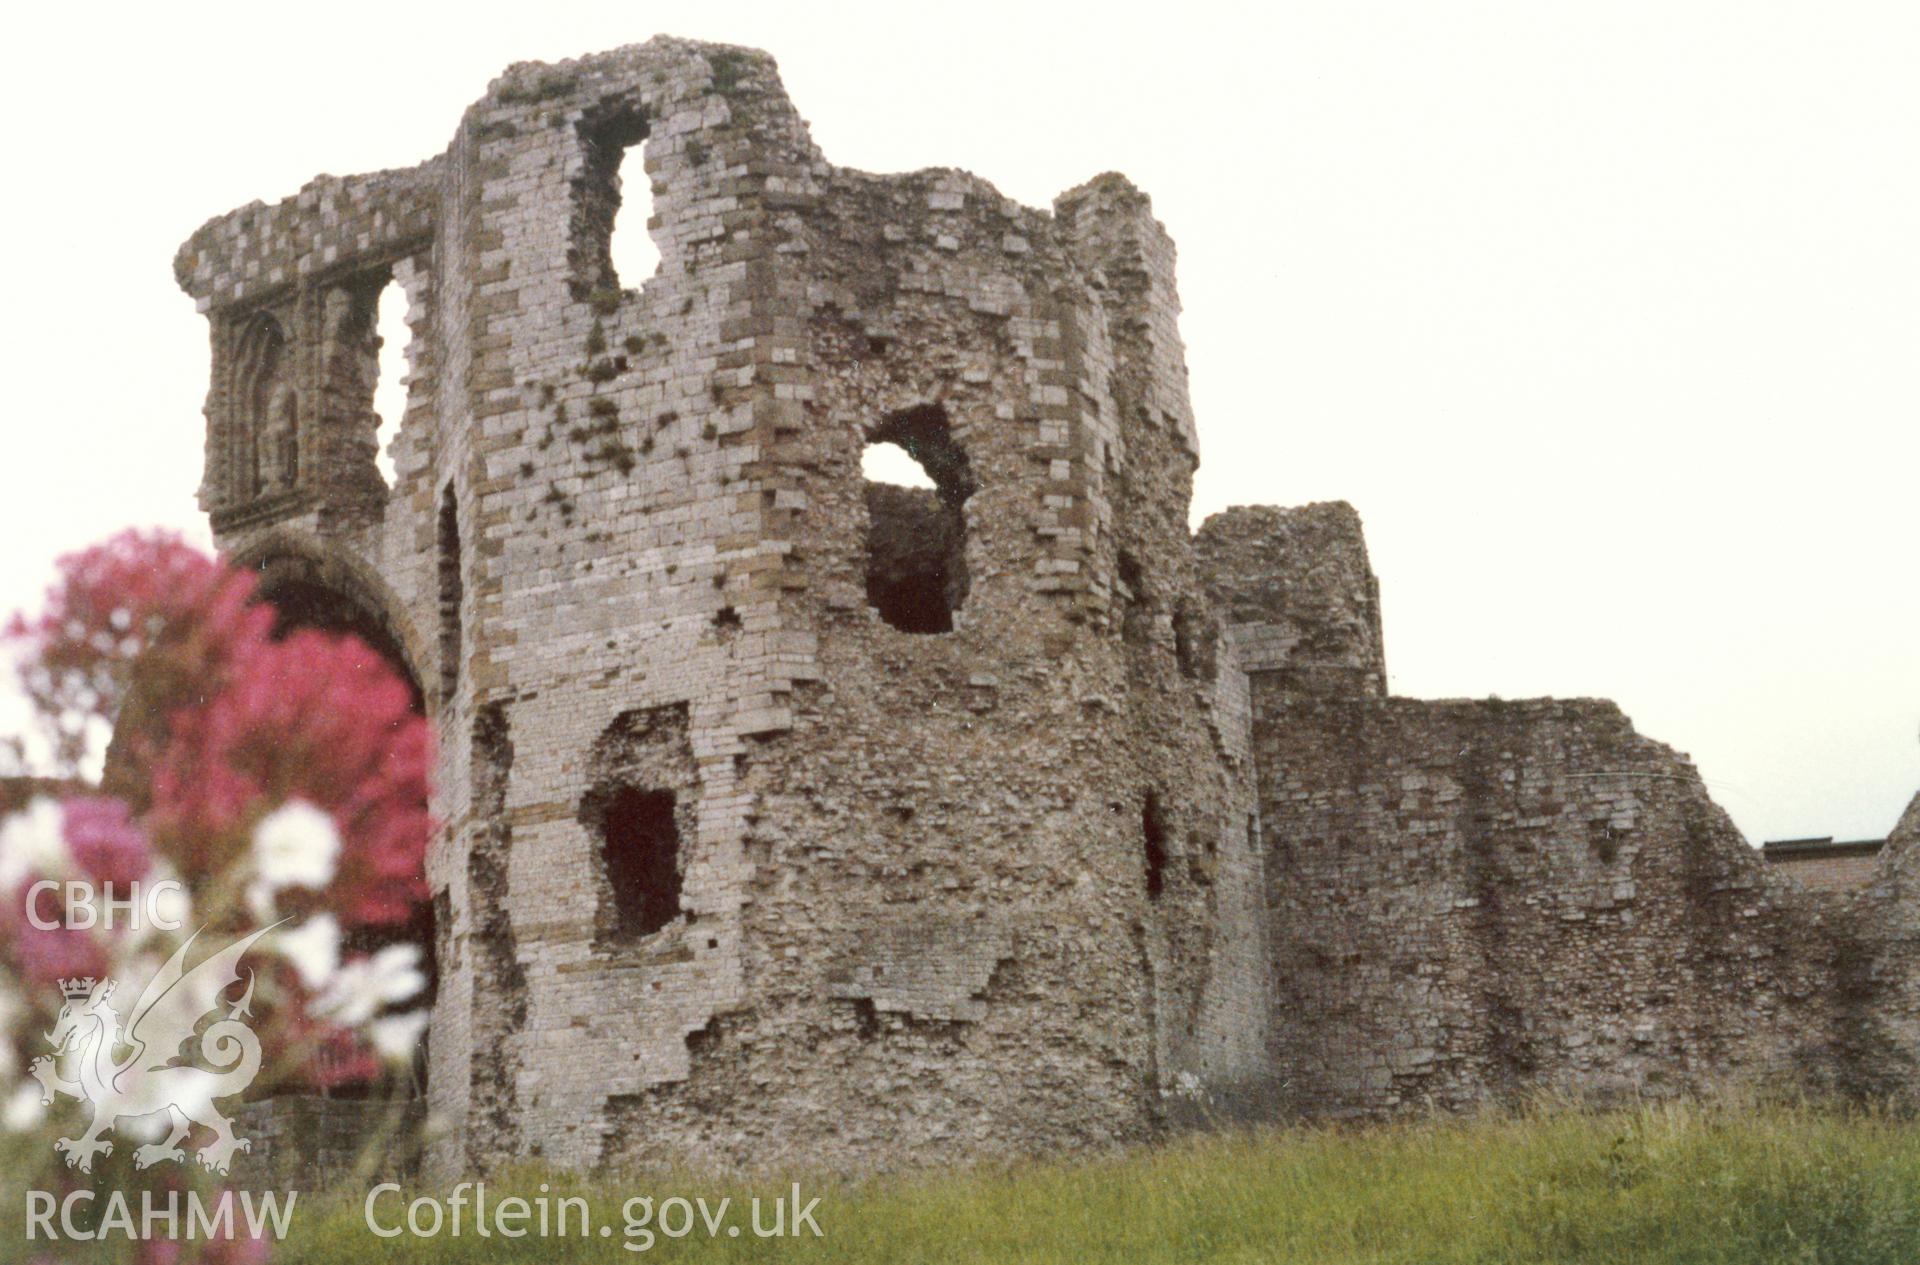 1 of a set of 8 colour prints showing views of Denbigh castle, collated by the former Central Office of Information.